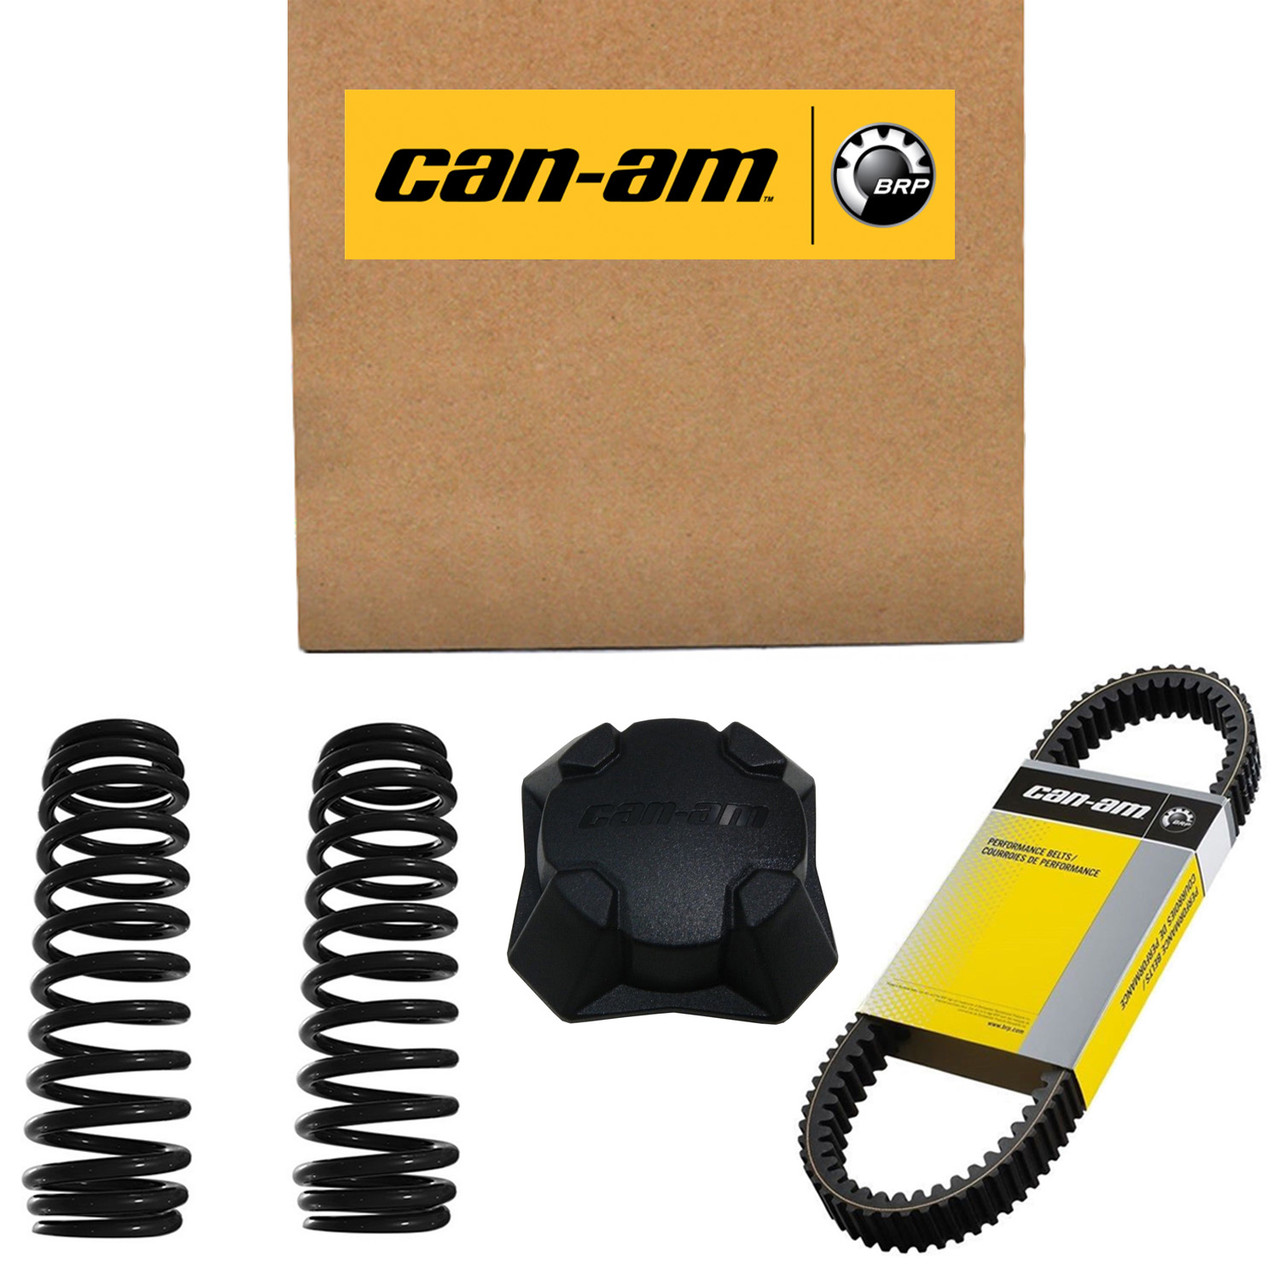 Can-Am New OEM Wiring Harness, 420864355